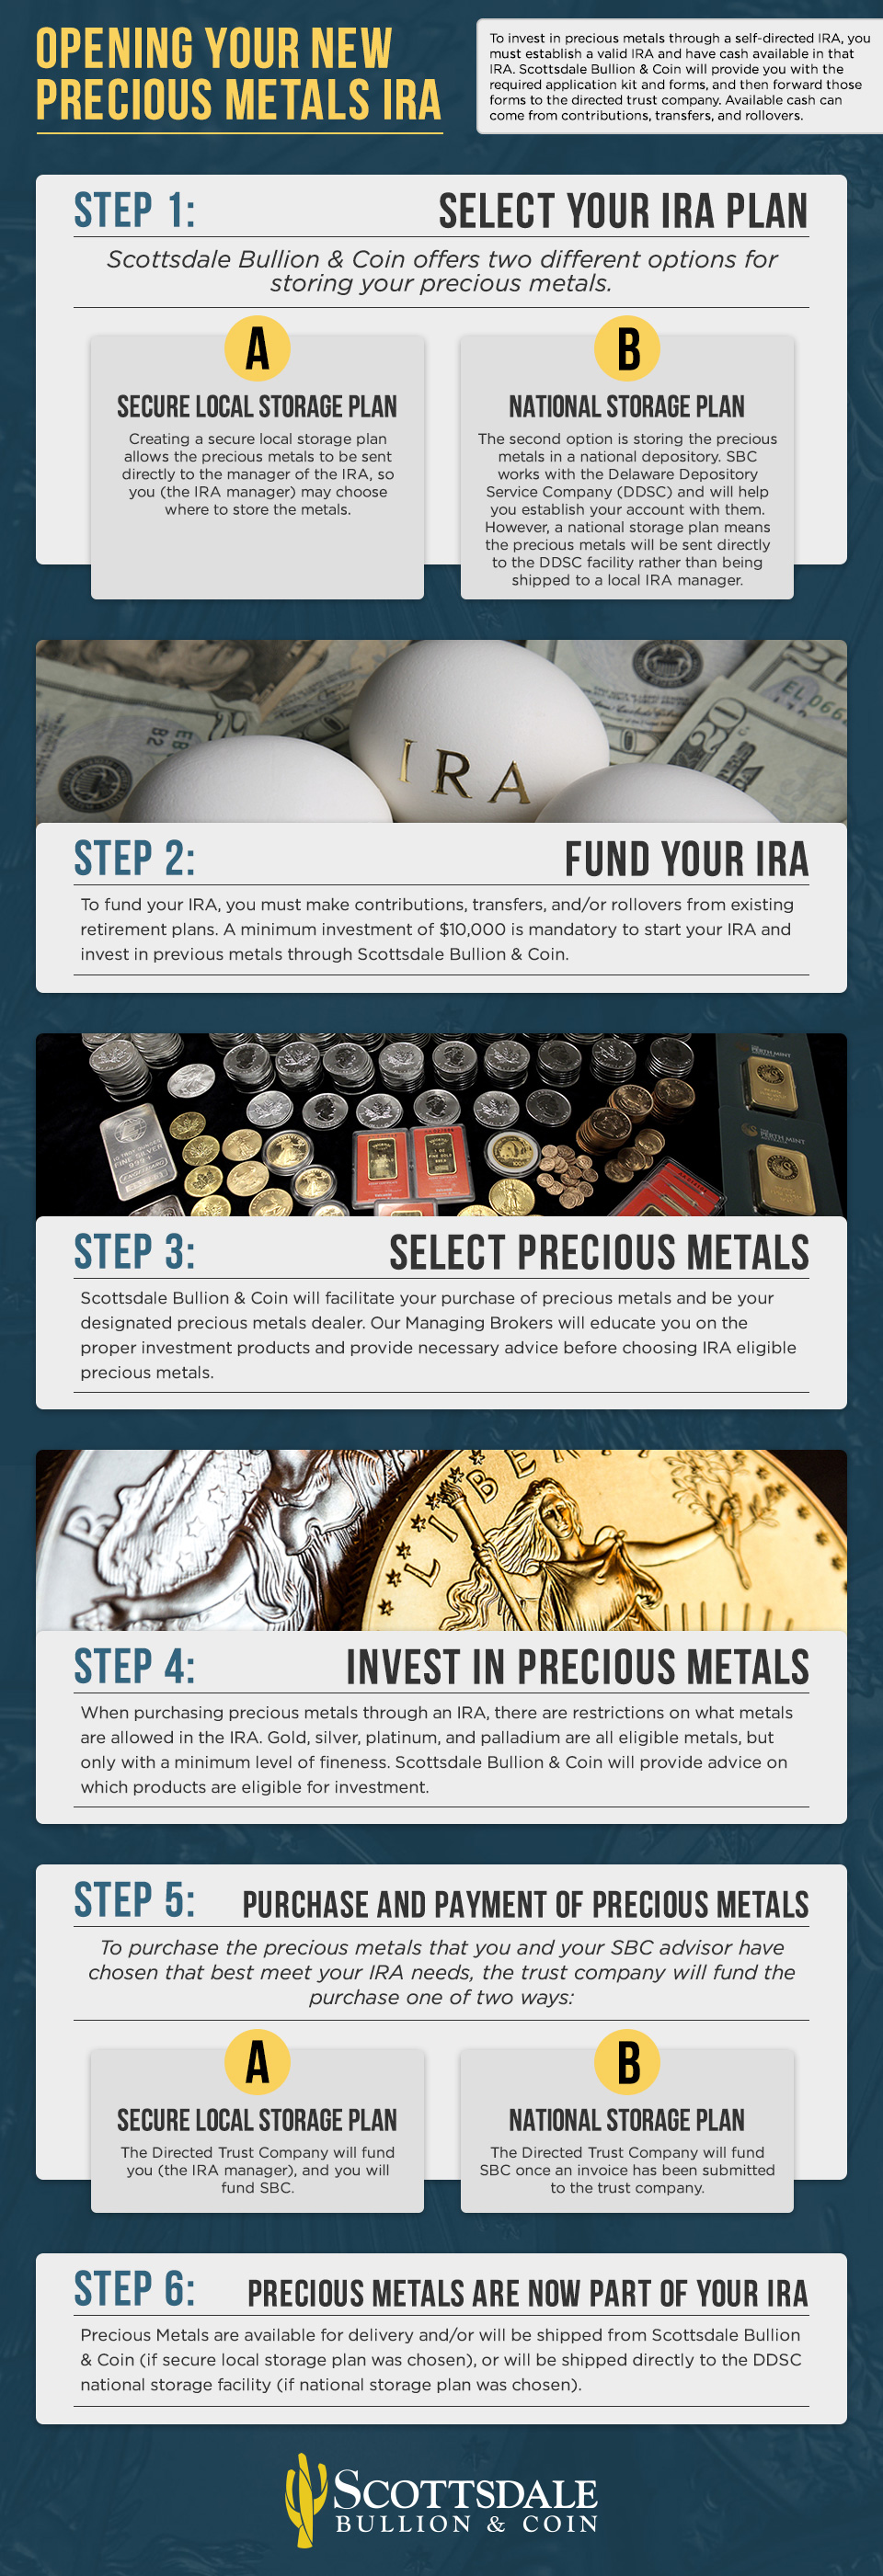 How a Self-Directed Precious Metals IRA Works: Set-Up Steps & Rules - Scottsdale Bullion & Coin®